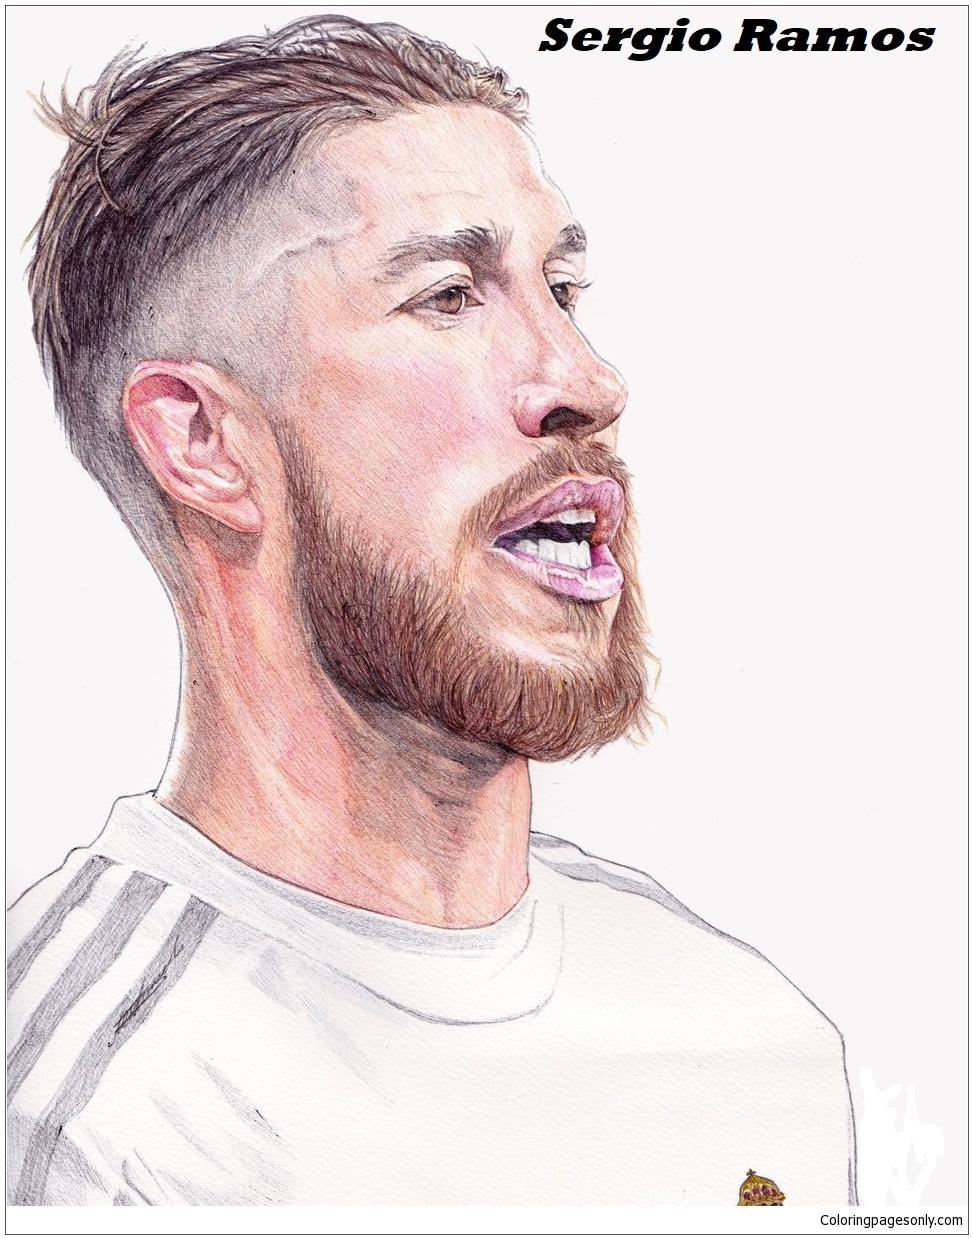 Sergio Ramos-image 4 Coloring Pages